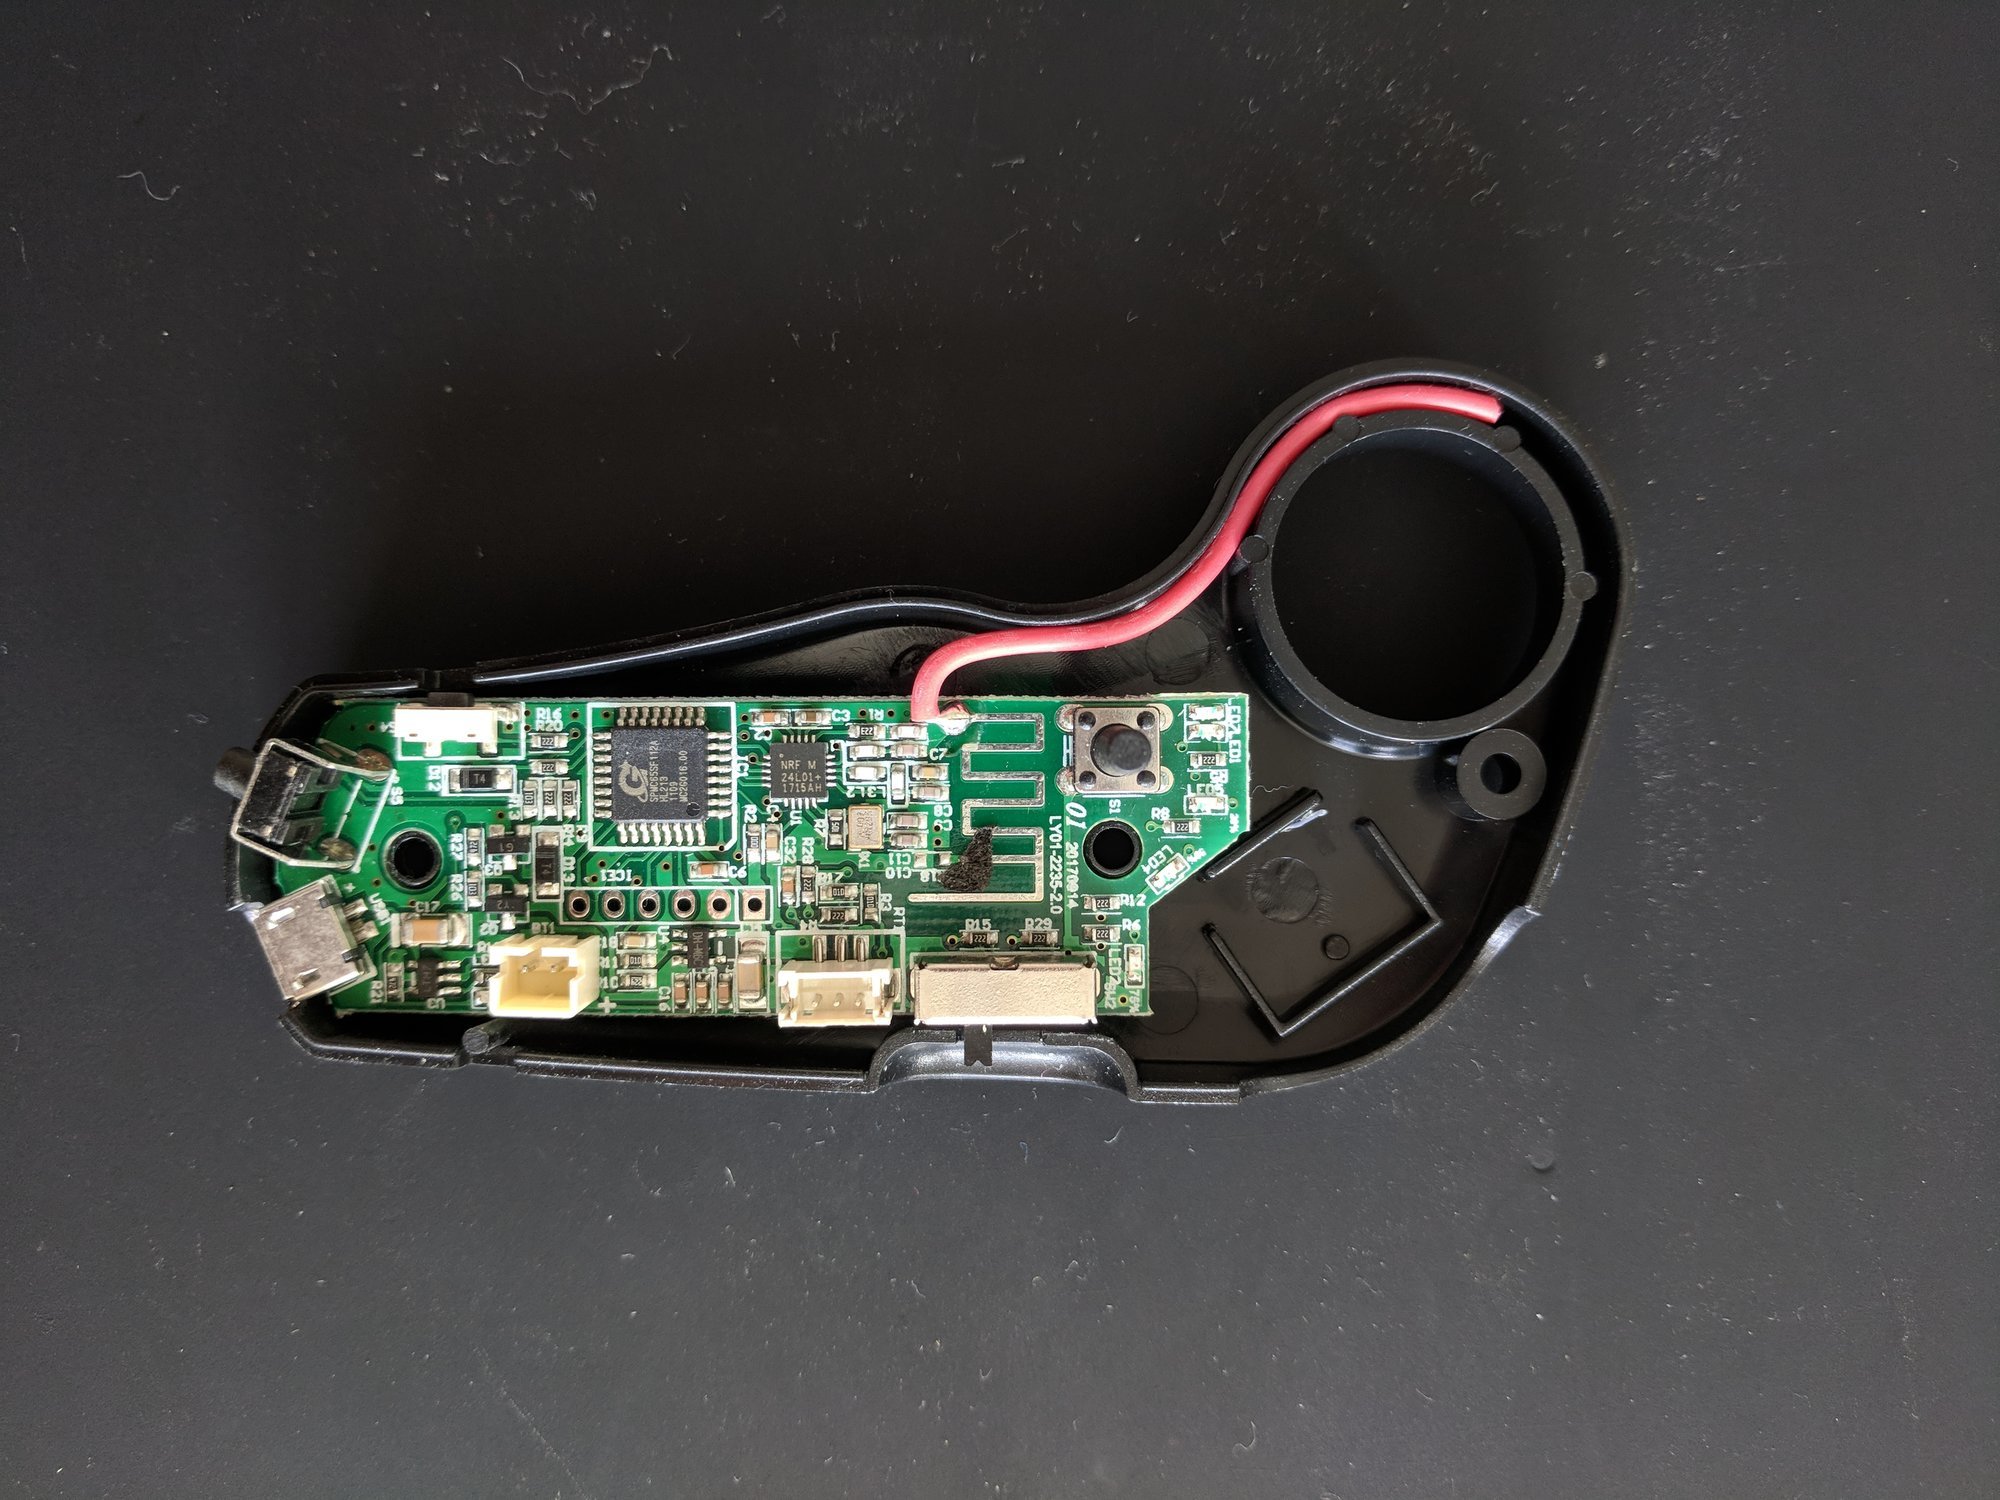 The disassembled remote control without sliding switch